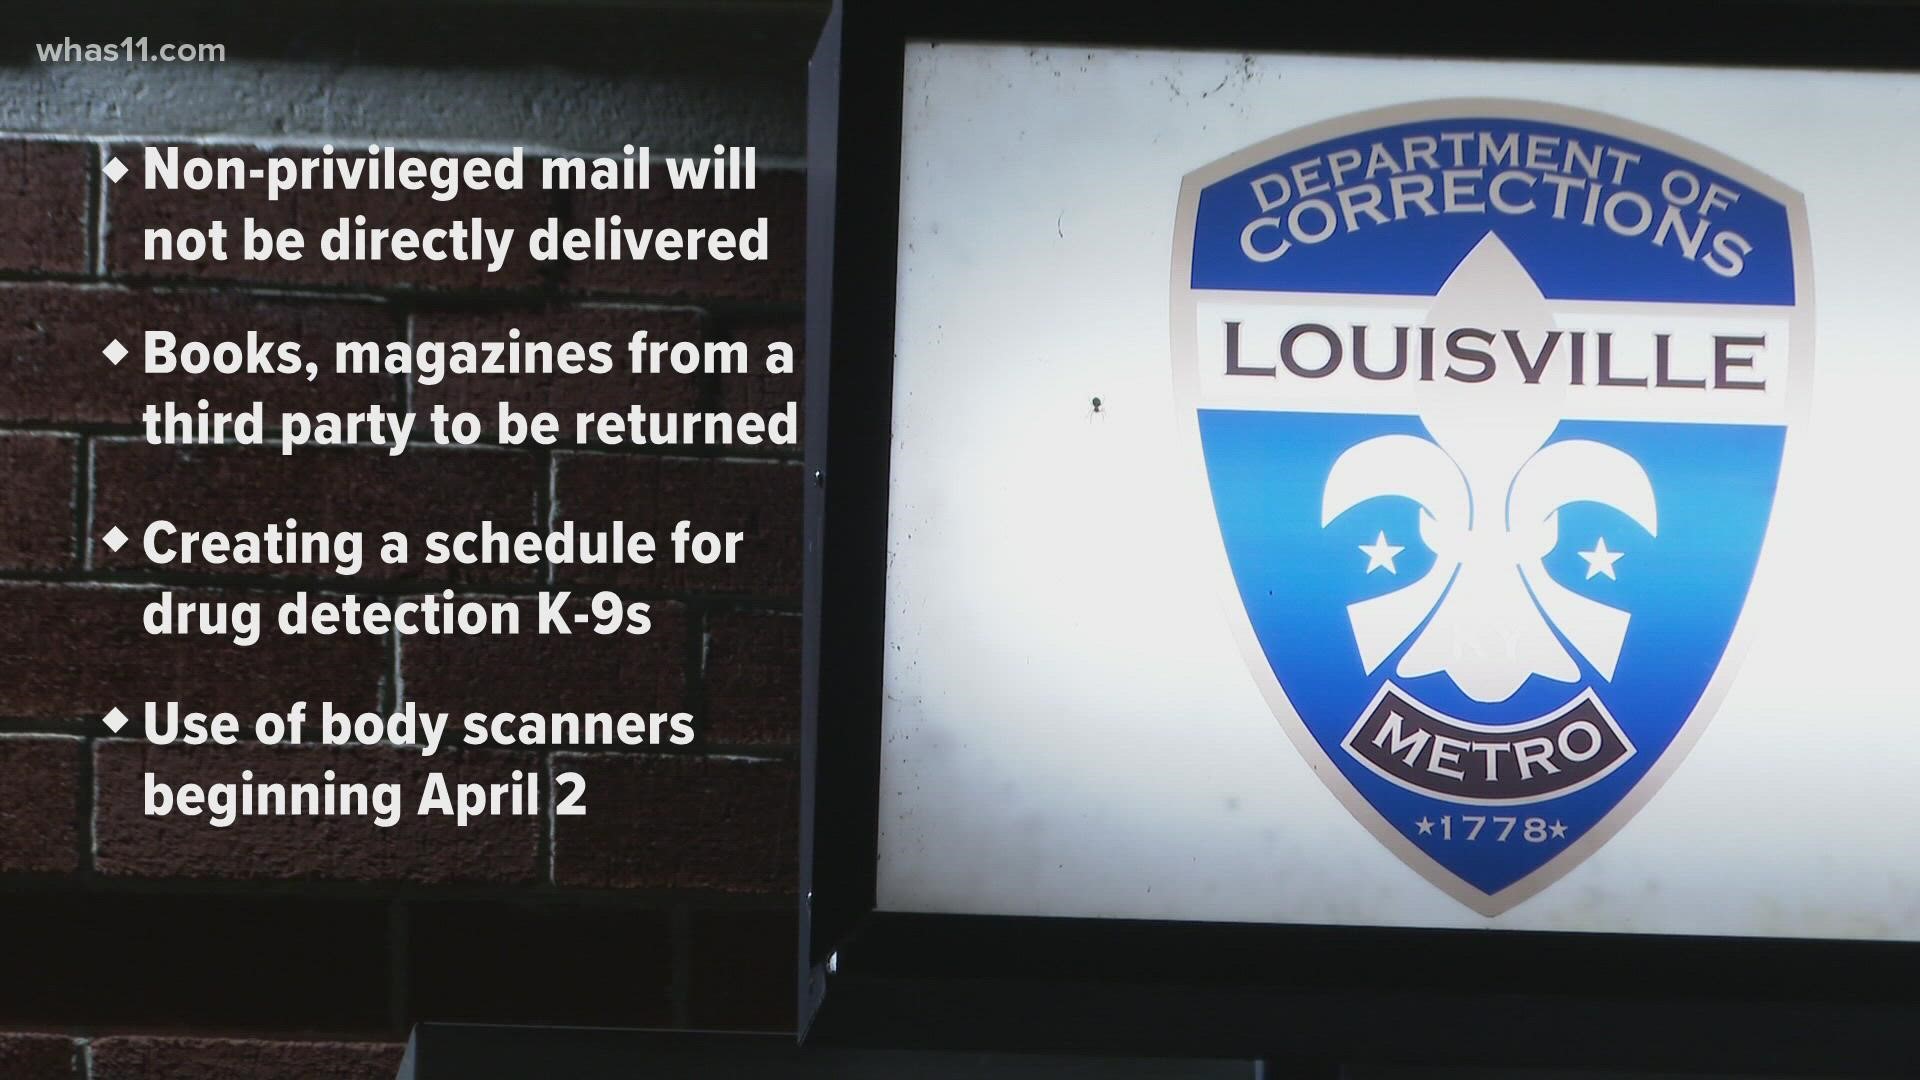 The new security measures will target contraband within mail to incarcerated people.